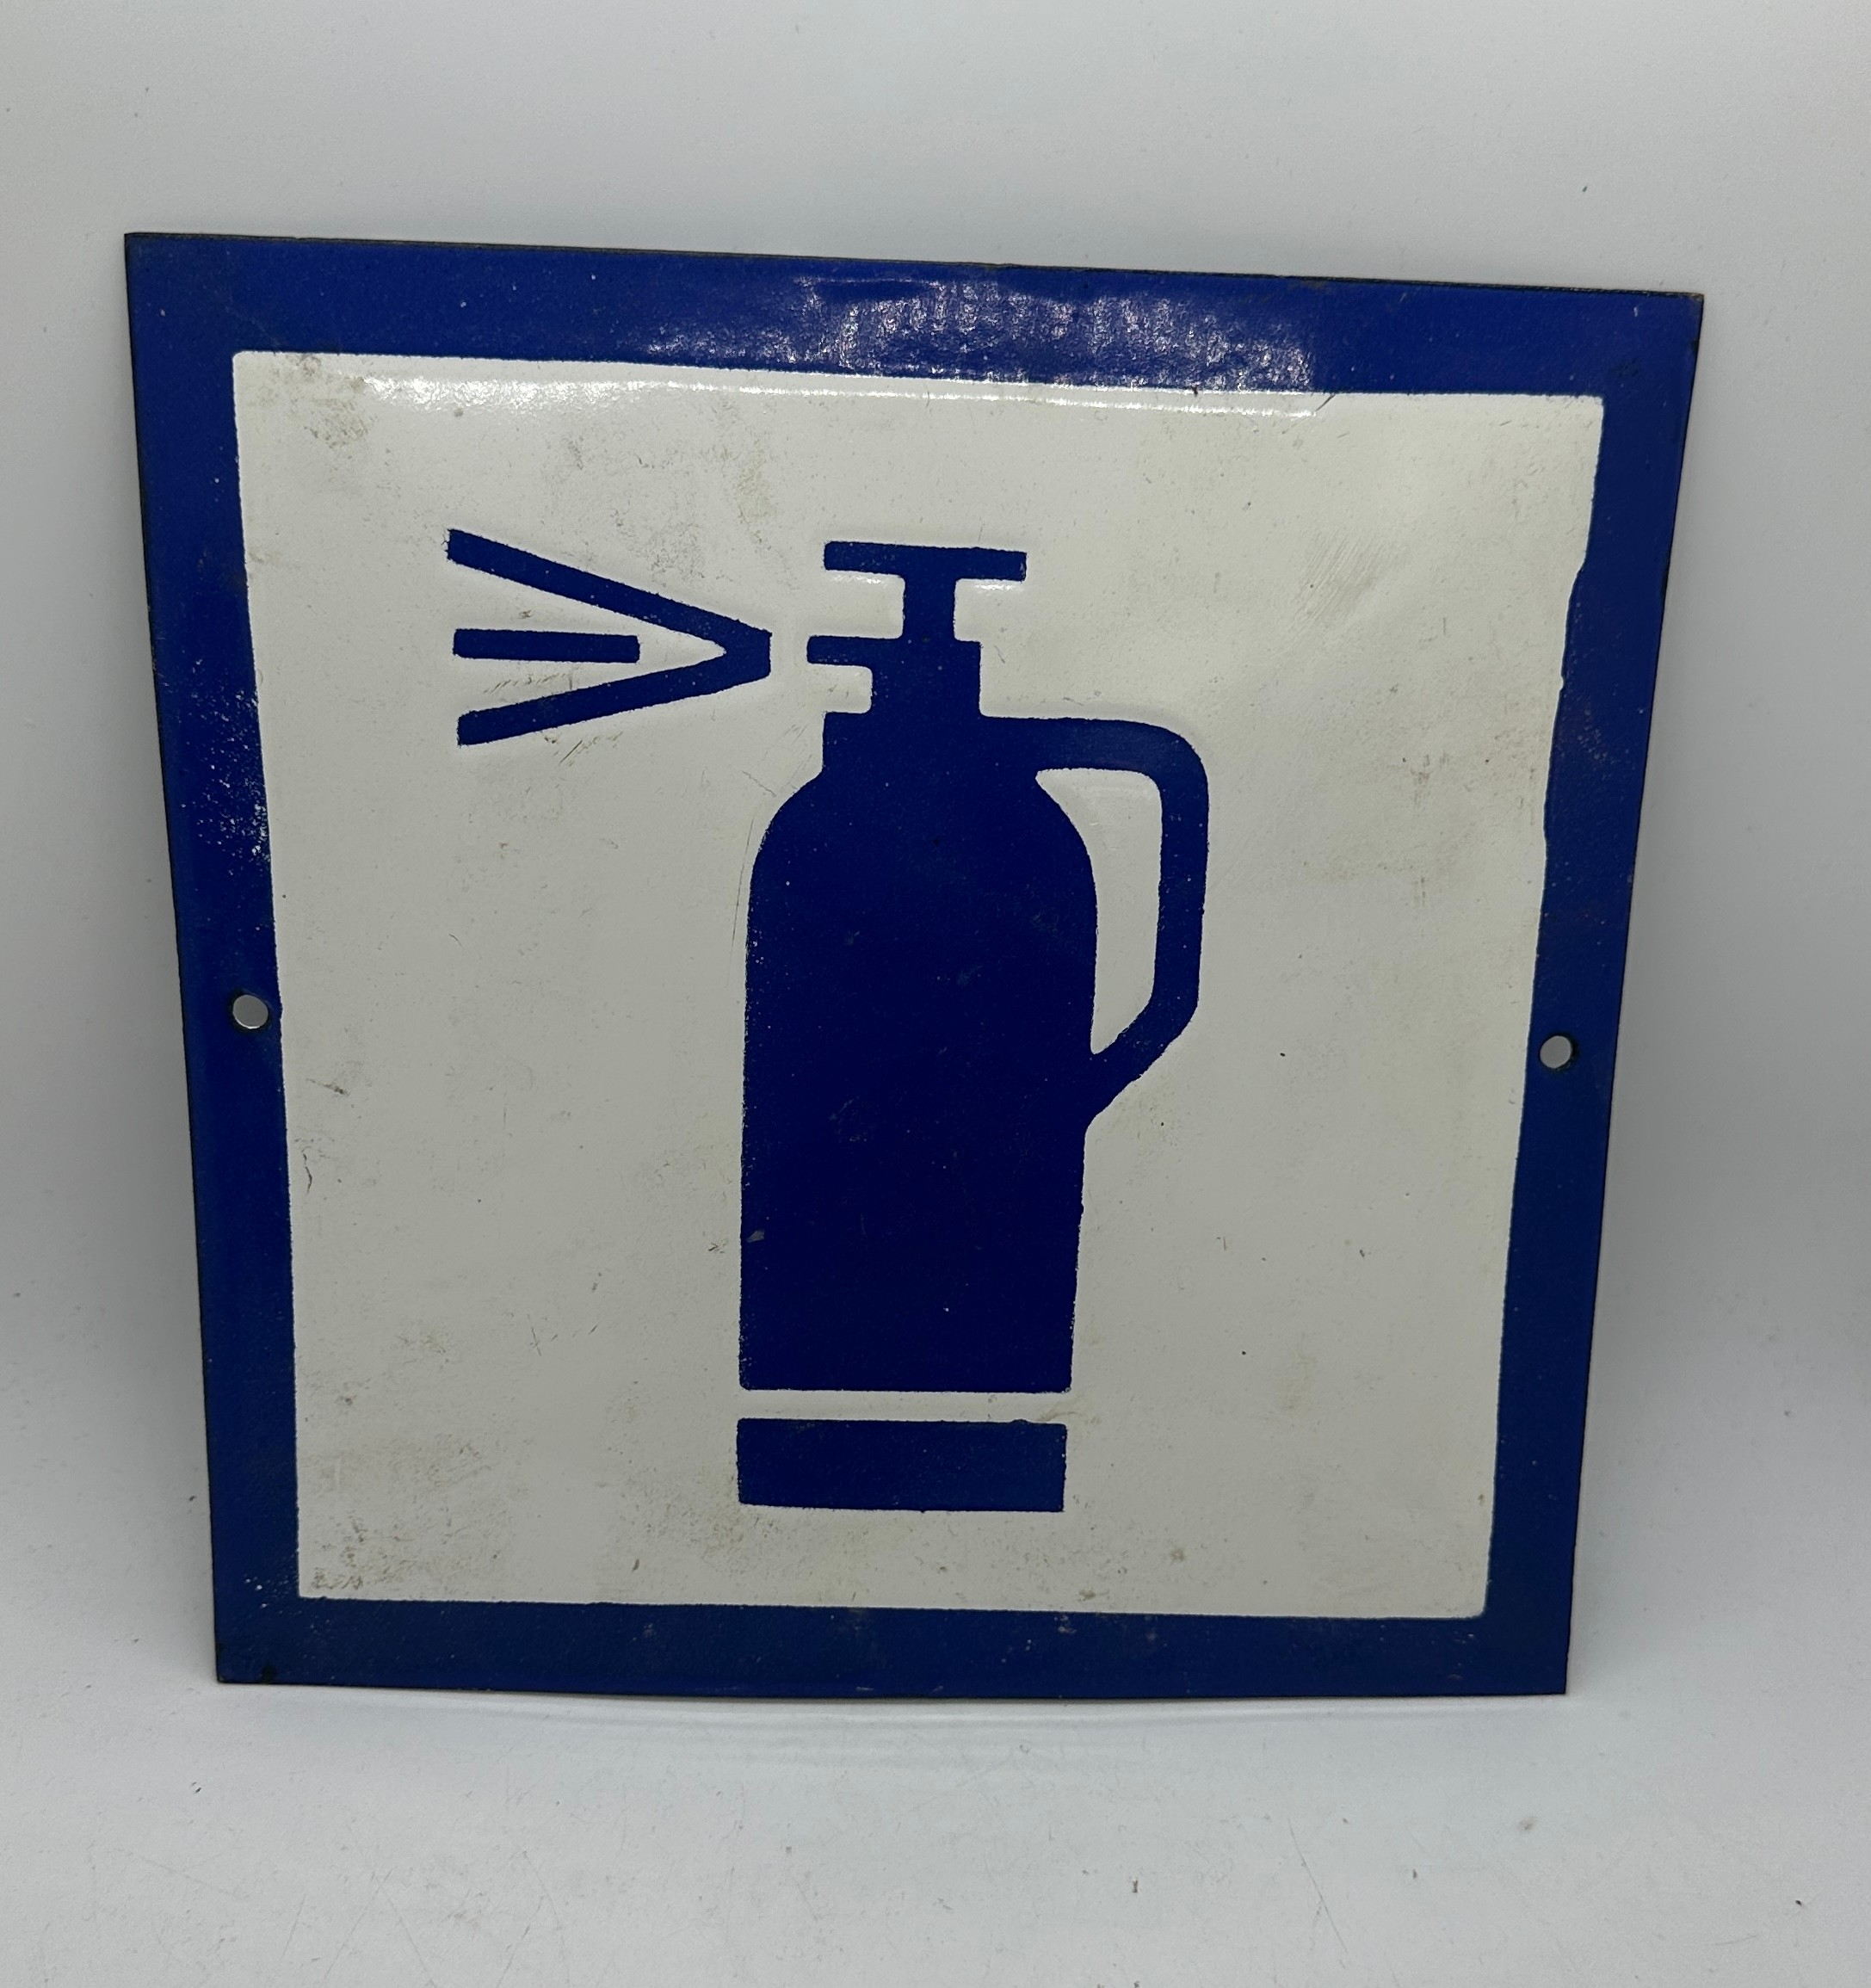 Enamel fire extinguisher sign measures approx 9.5 long by 9.5 wide